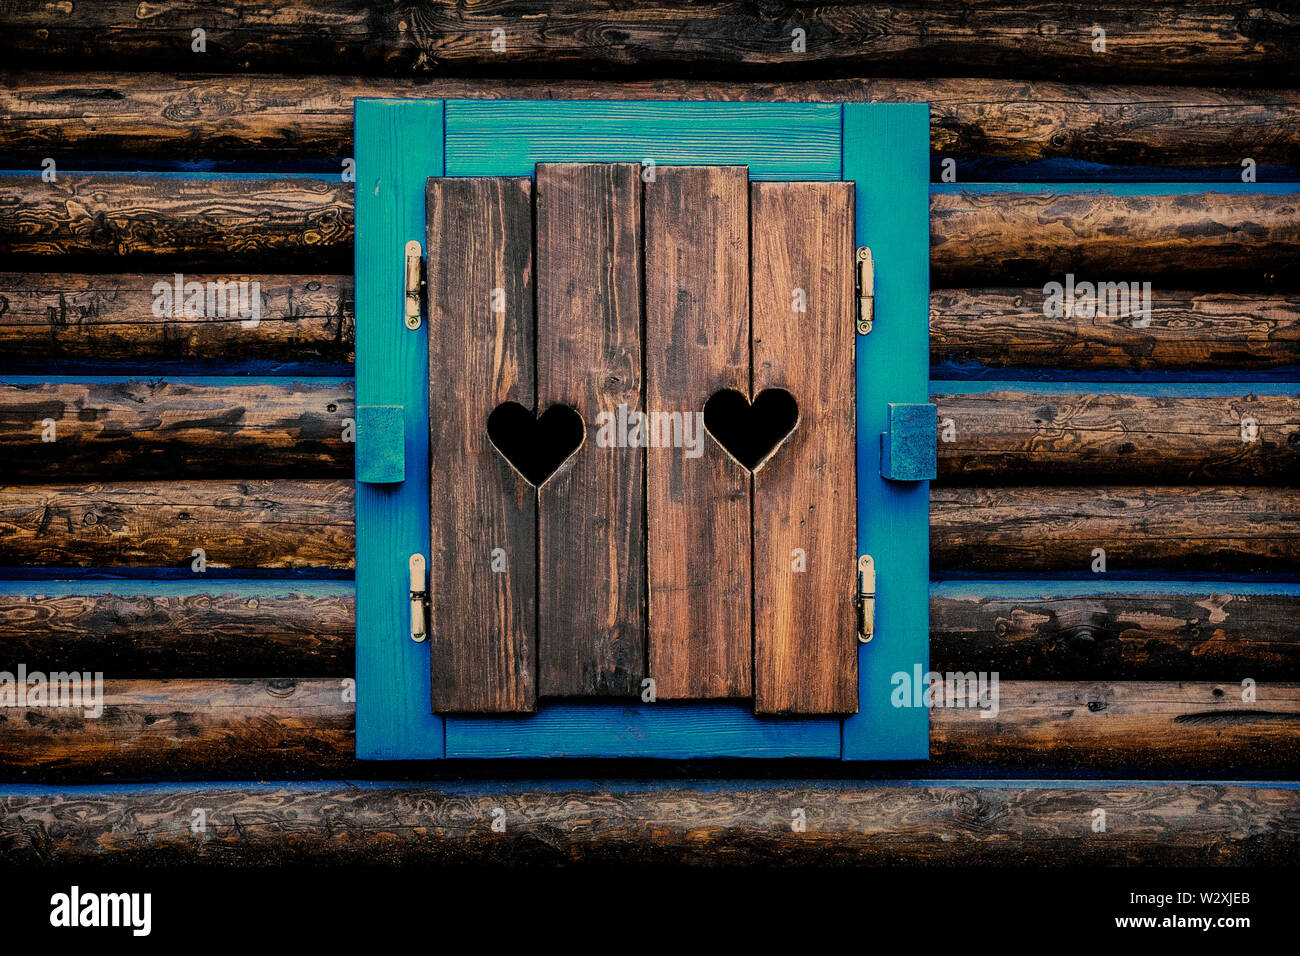 Architecture detail - old wooden window shutters with carved hearts. Stock Photo